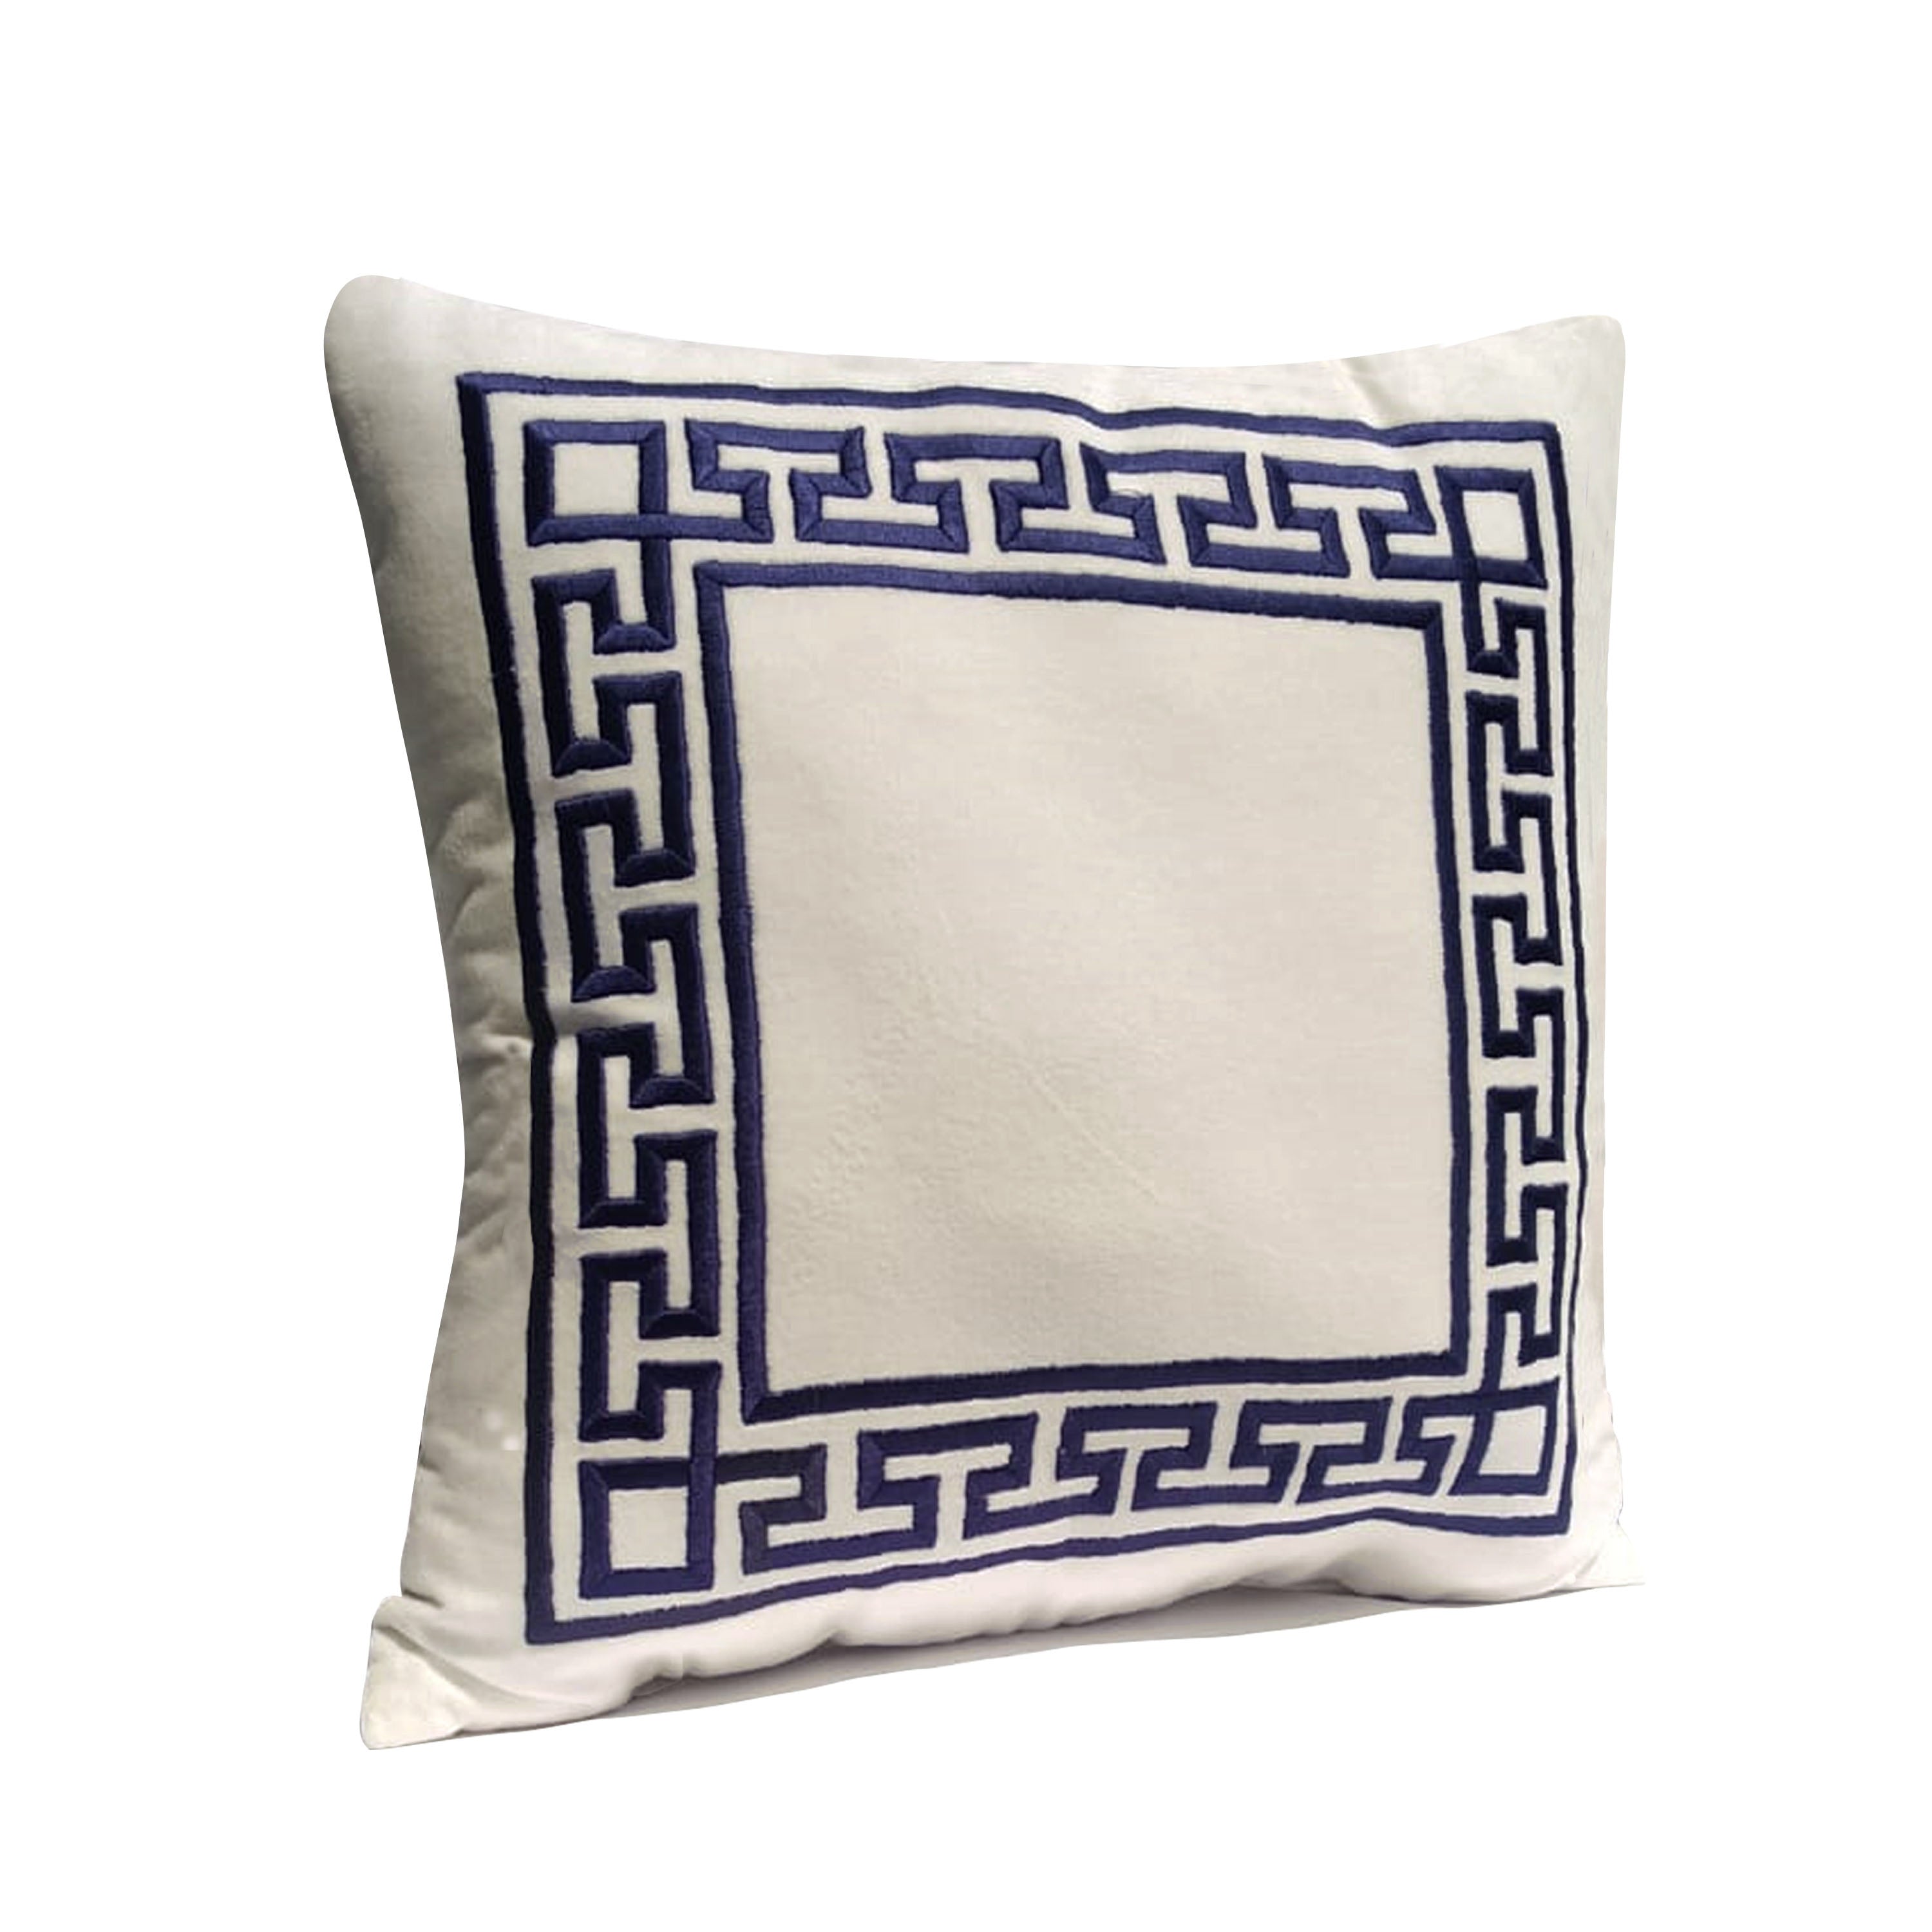 Amore Beaute luxury pillows will make a statement in any room!